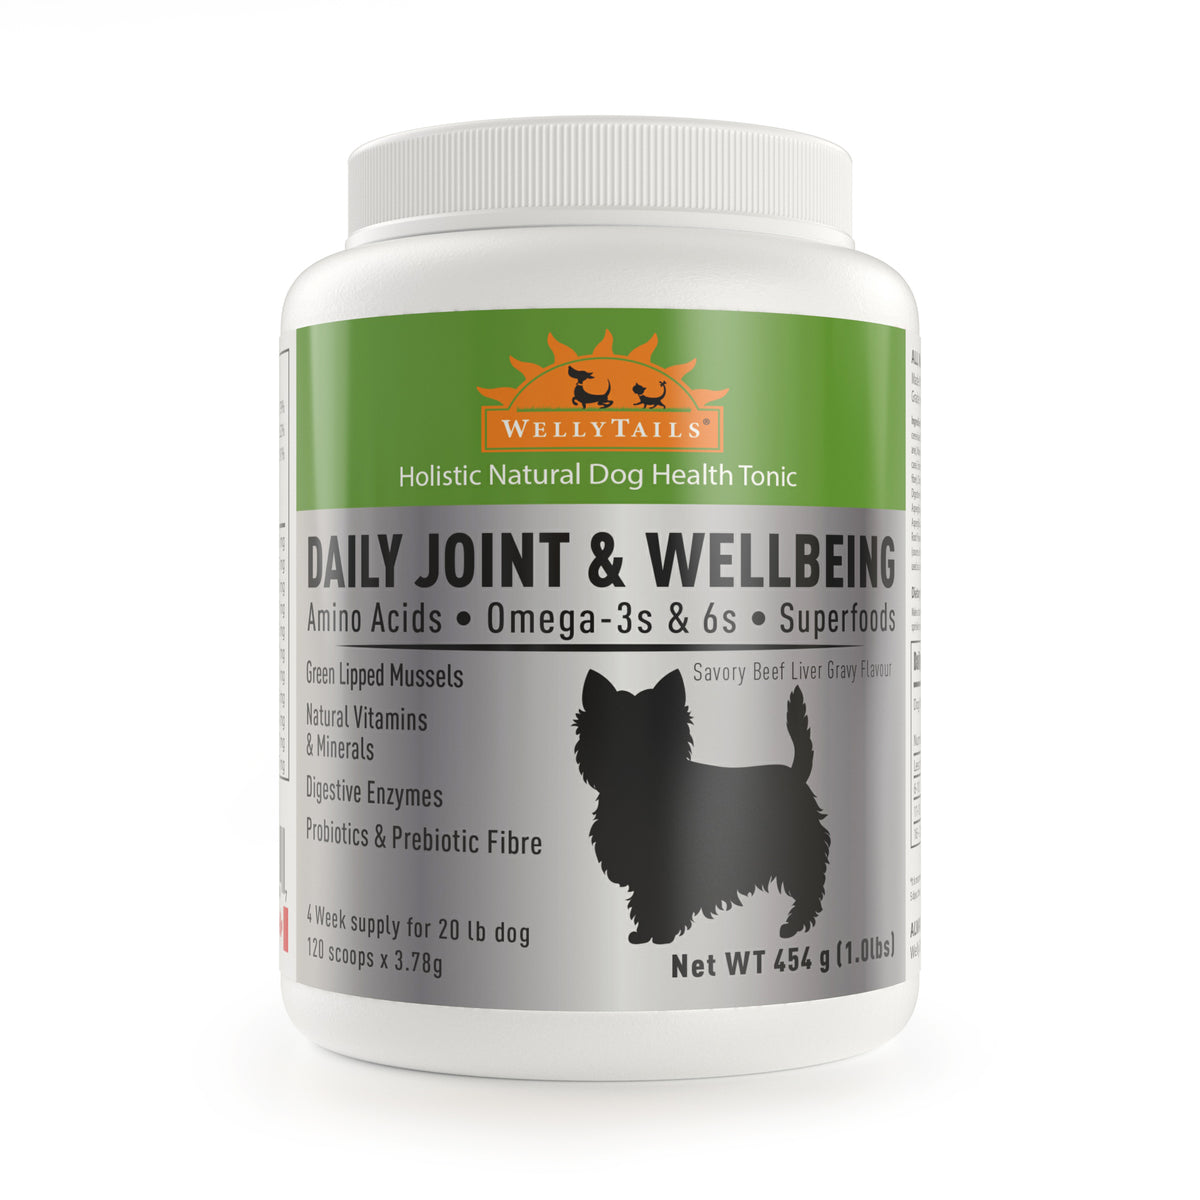 With smaller scoop and dosage chart for small dogs. Has joint health supporting